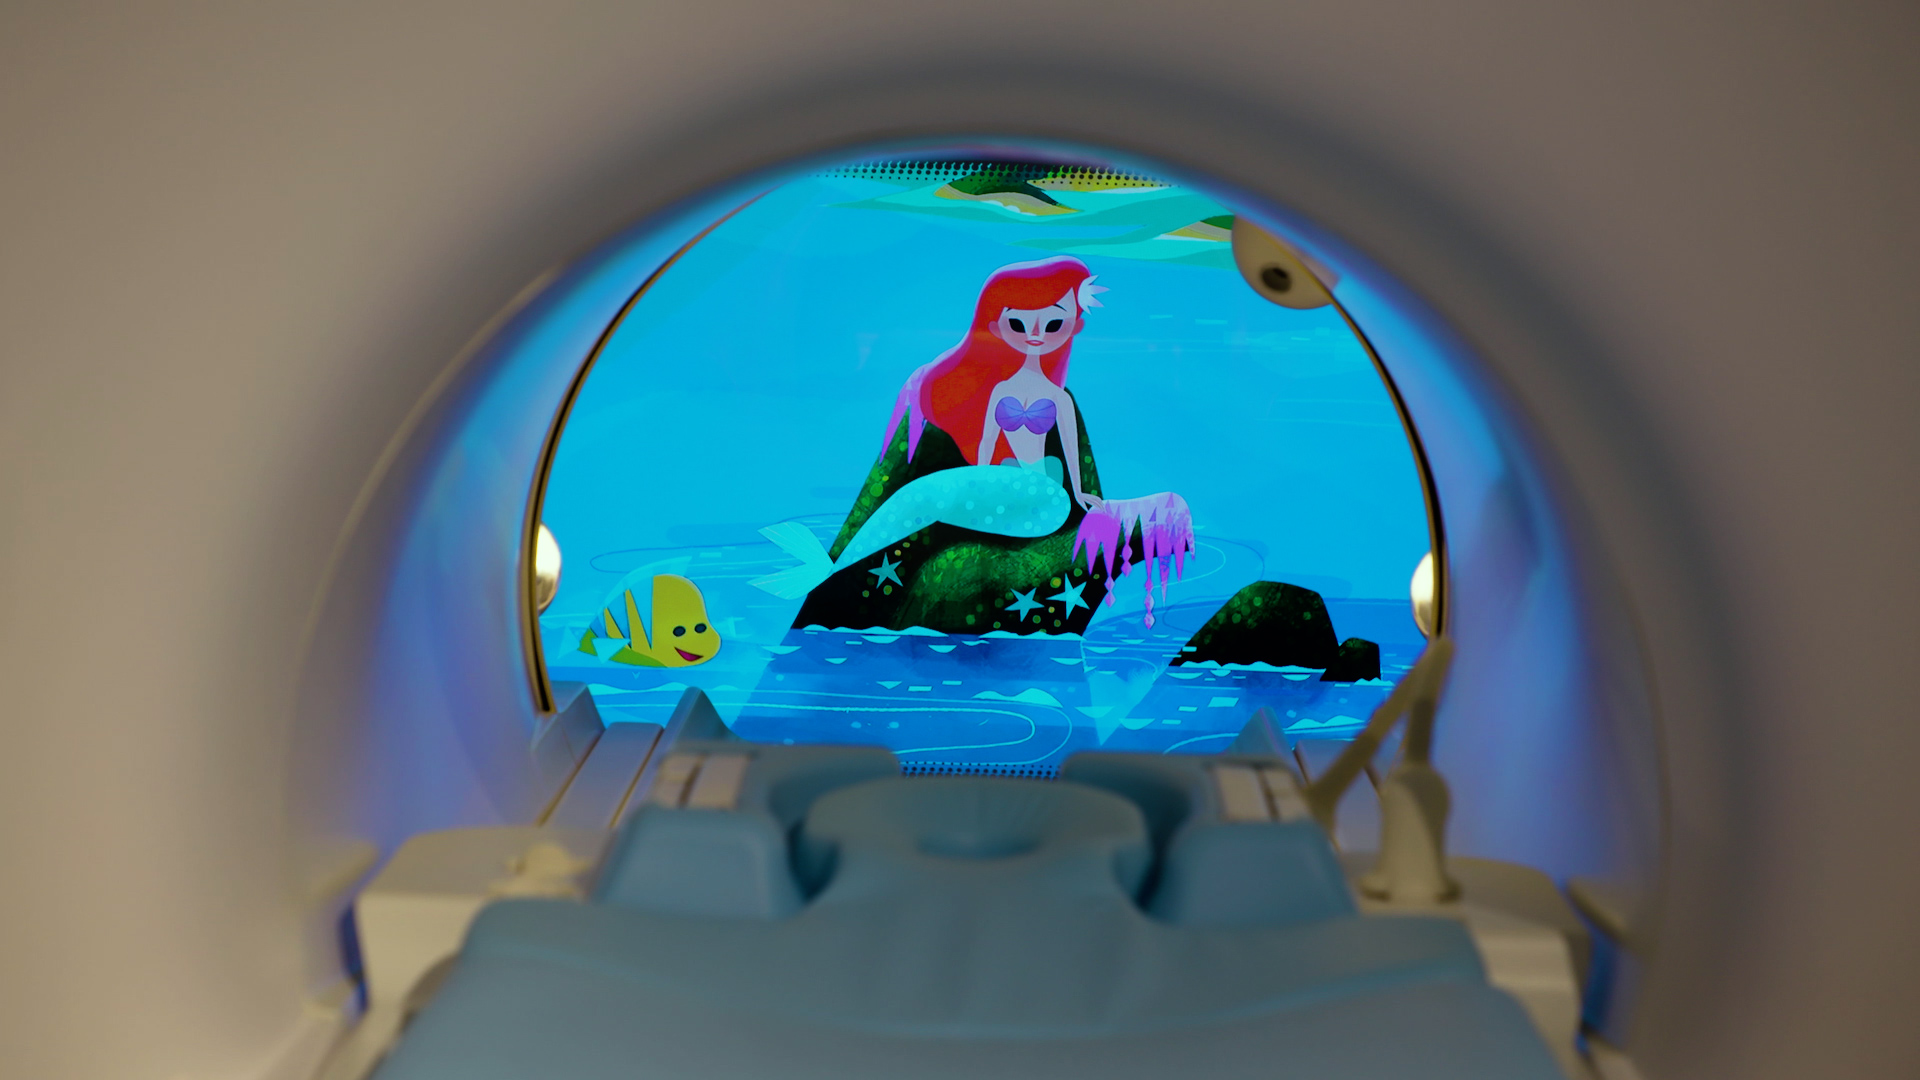 Philips Disney Ambient Experience Ariel and Nemo